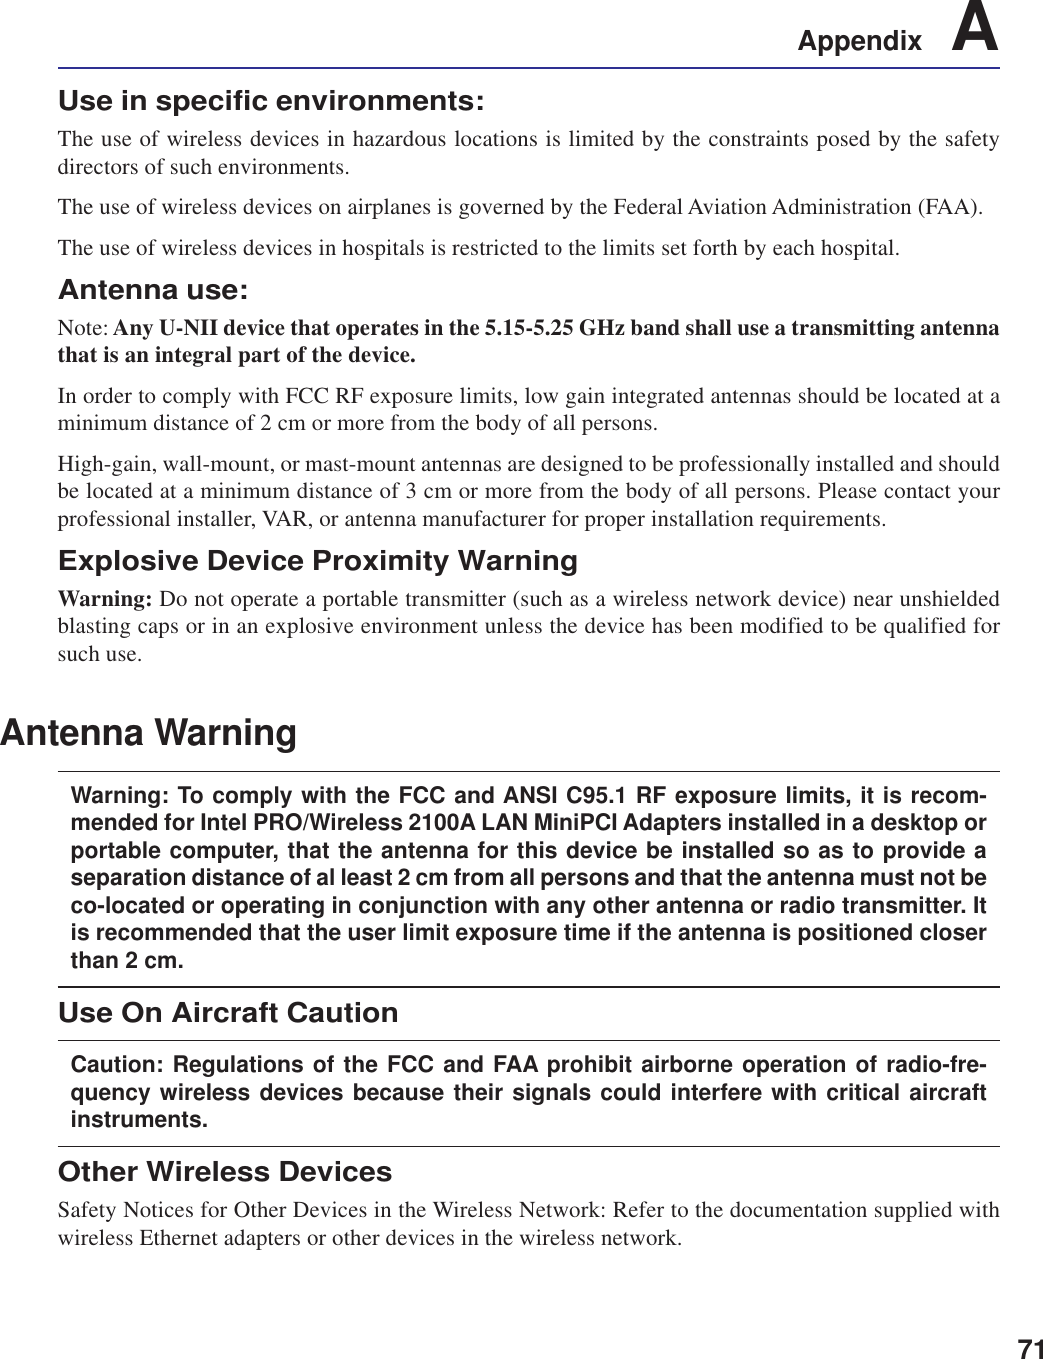 71Appendix    AUse in specific environments:The use of wireless devices in hazardous locations is limited by the constraints posed by the safetydirectors of such environments.The use of wireless devices on airplanes is governed by the Federal Aviation Administration (FAA).The use of wireless devices in hospitals is restricted to the limits set forth by each hospital.Antenna use:Note: Any U-NII device that operates in the 5.15-5.25 GHz band shall use a transmitting antennathat is an integral part of the device.In order to comply with FCC RF exposure limits, low gain integrated antennas should be located at aminimum distance of 2 cm or more from the body of all persons.High-gain, wall-mount, or mast-mount antennas are designed to be professionally installed and shouldbe located at a minimum distance of 3 cm or more from the body of all persons. Please contact yourprofessional installer, VAR, or antenna manufacturer for proper installation requirements.Explosive Device Proximity WarningWarning: Do not operate a portable transmitter (such as a wireless network device) near unshieldedblasting caps or in an explosive environment unless the device has been modified to be qualified forsuch use.Antenna WarningWarning: To comply with the FCC and ANSI C95.1 RF exposure limits, it is recom-mended for Intel PRO/Wireless 2100A LAN MiniPCI Adapters installed in a desktop orportable computer, that the antenna for this device be installed so as to provide aseparation distance of al least 2 cm from all persons and that the antenna must not beco-located or operating in conjunction with any other antenna or radio transmitter. Itis recommended that the user limit exposure time if the antenna is positioned closerthan 2 cm.Use On Aircraft CautionCaution: Regulations of the FCC and FAA prohibit airborne operation of radio-fre-quency wireless devices because their signals could interfere with critical aircraftinstruments.Other Wireless DevicesSafety Notices for Other Devices in the Wireless Network: Refer to the documentation supplied withwireless Ethernet adapters or other devices in the wireless network.